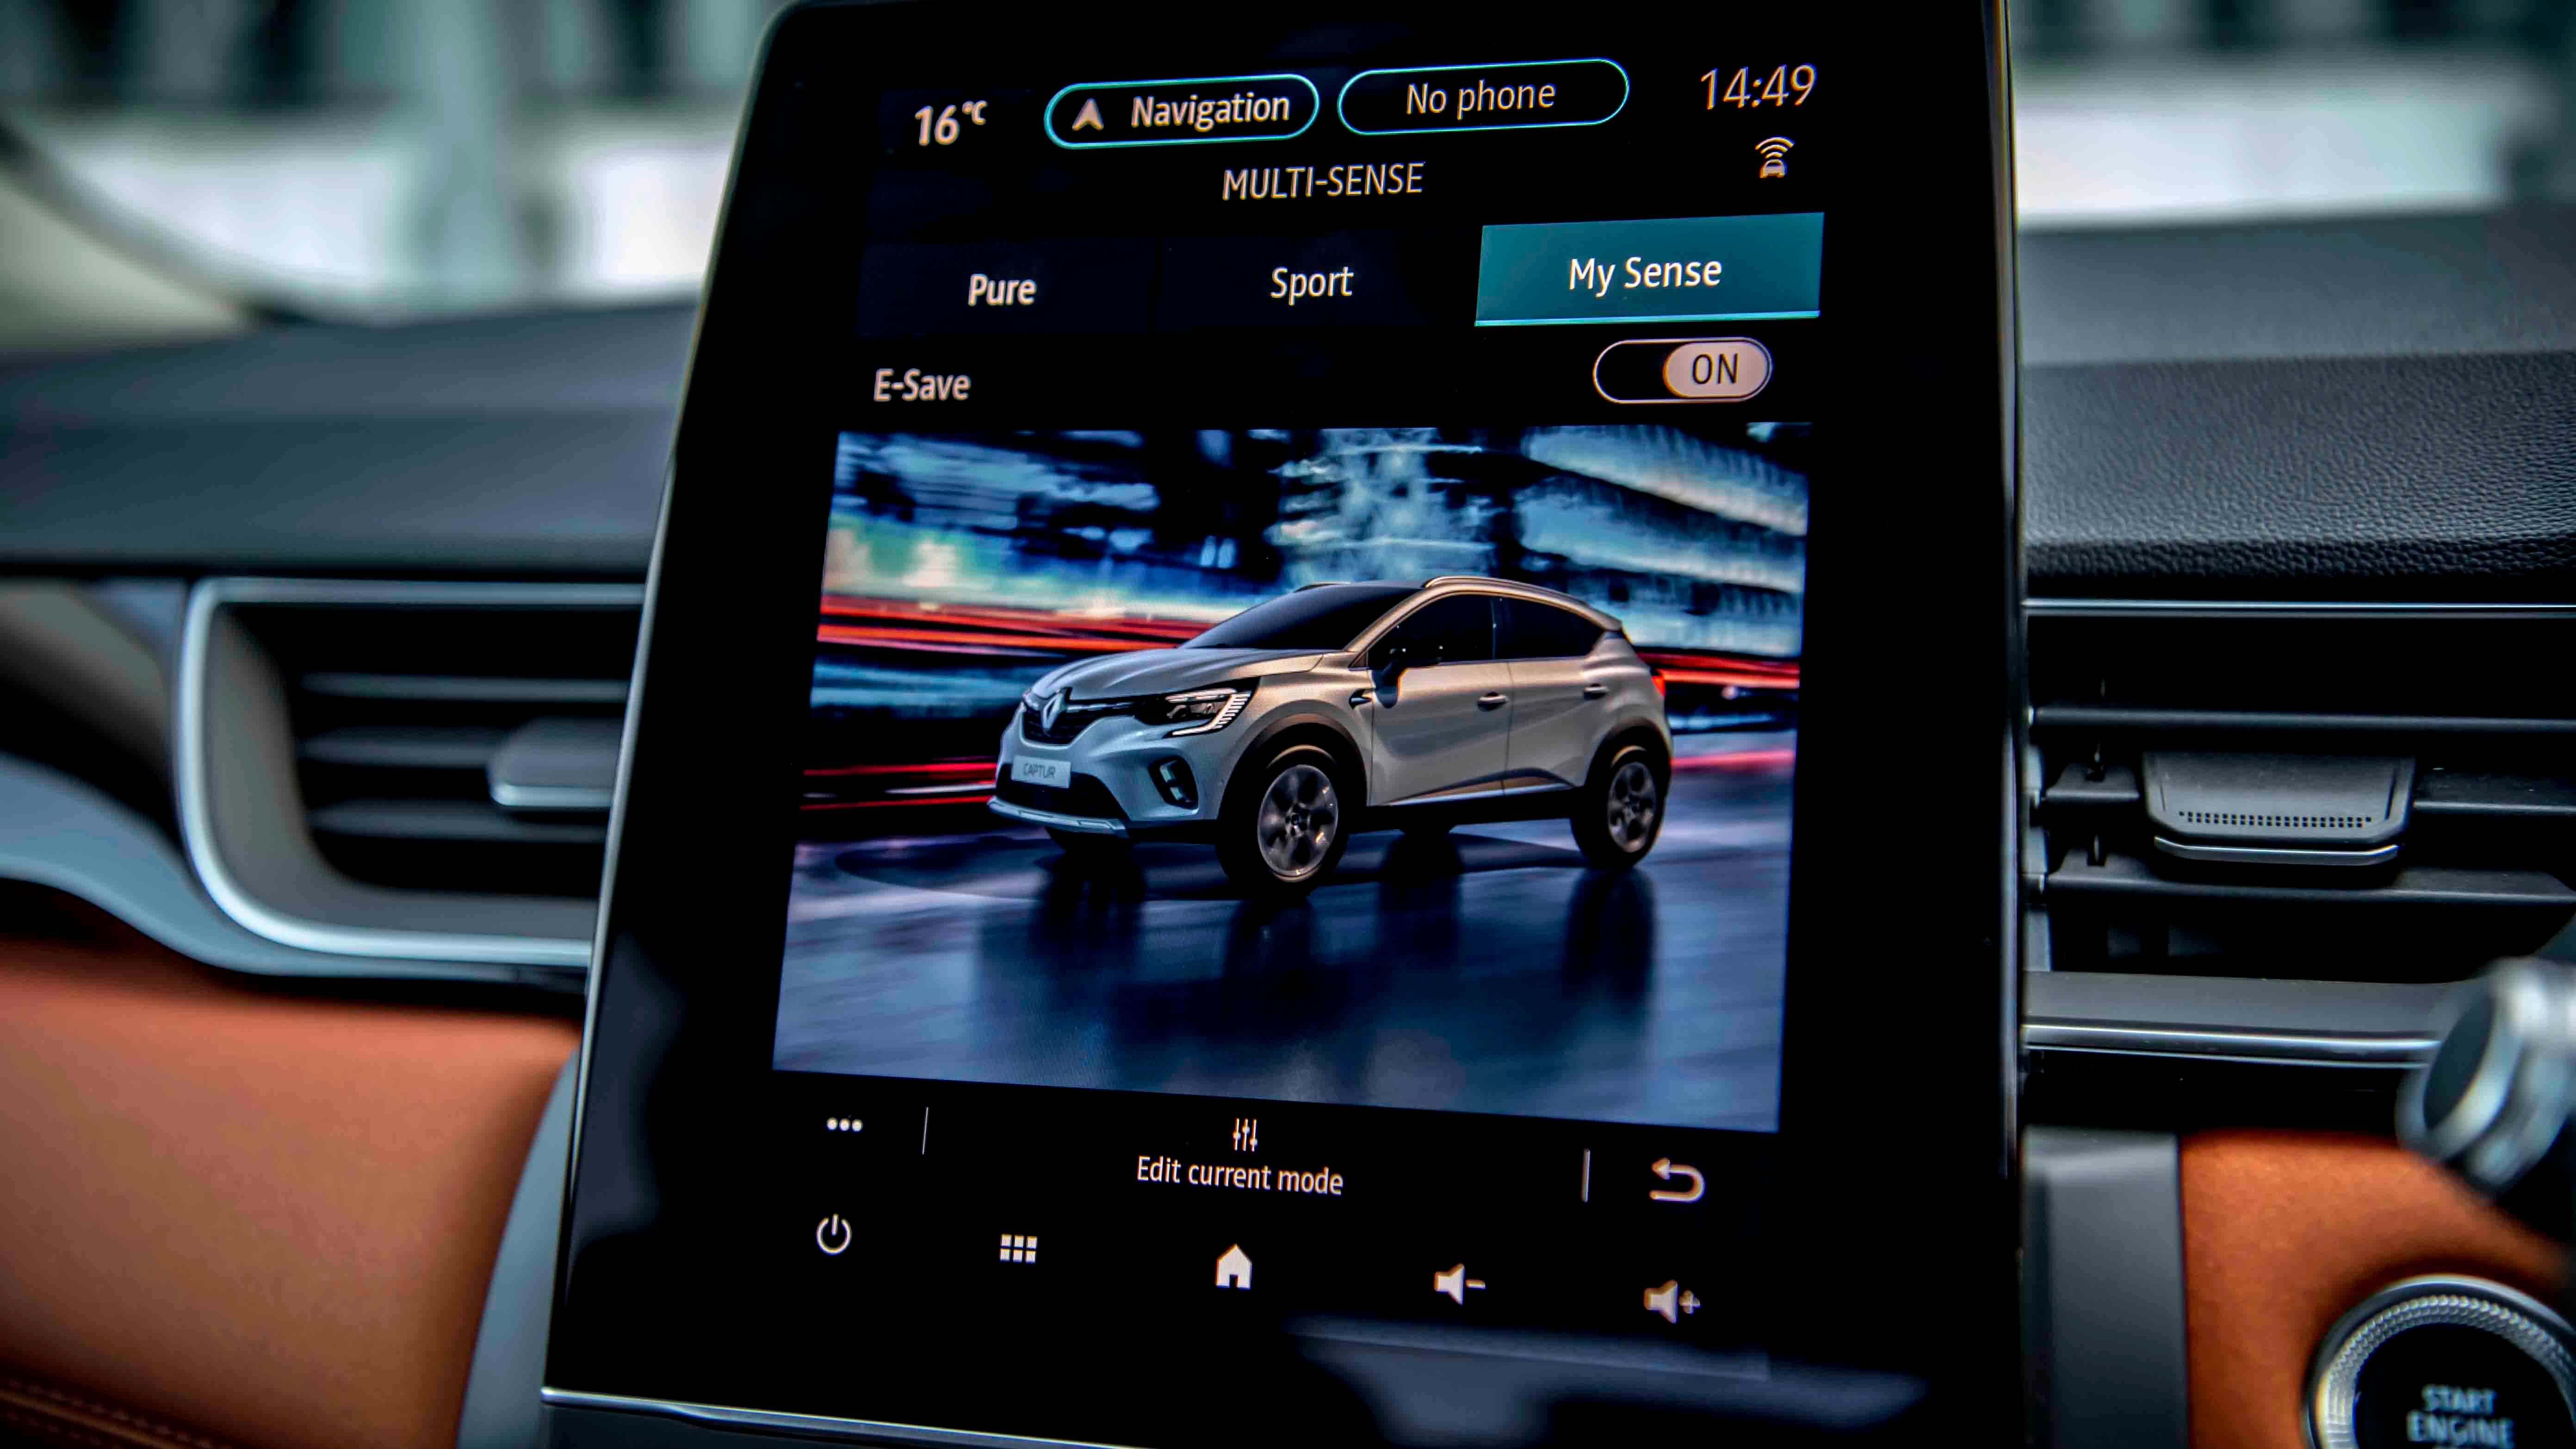 Renault Captur touchscreen with hybrid setting